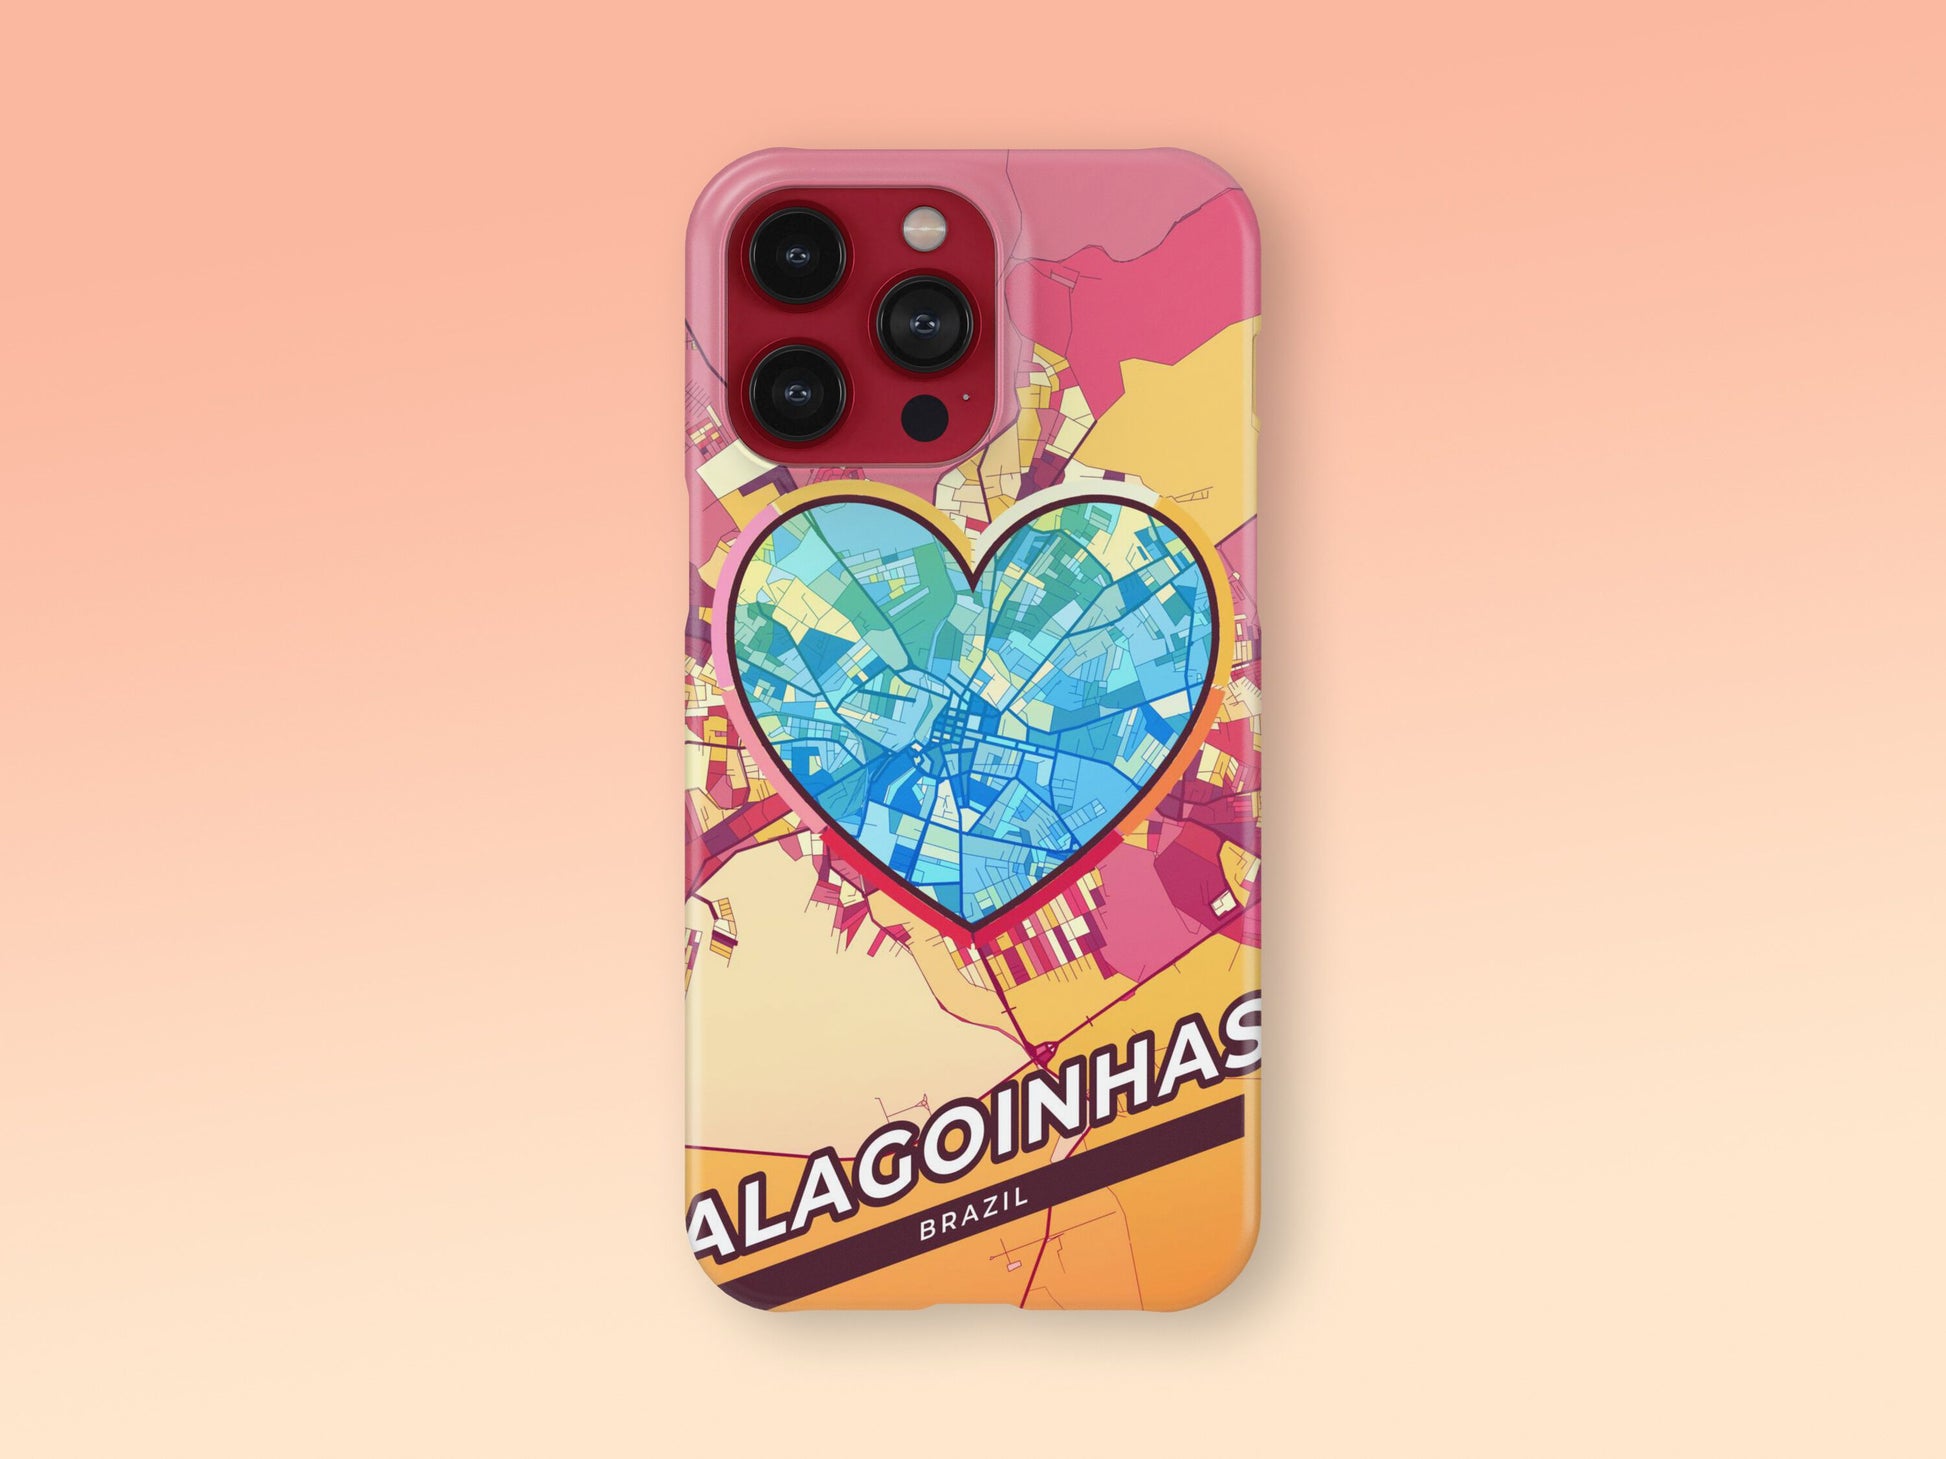 Alagoinhas Brazil slim phone case with colorful icon. Birthday, wedding or housewarming gift. Couple match cases. 2